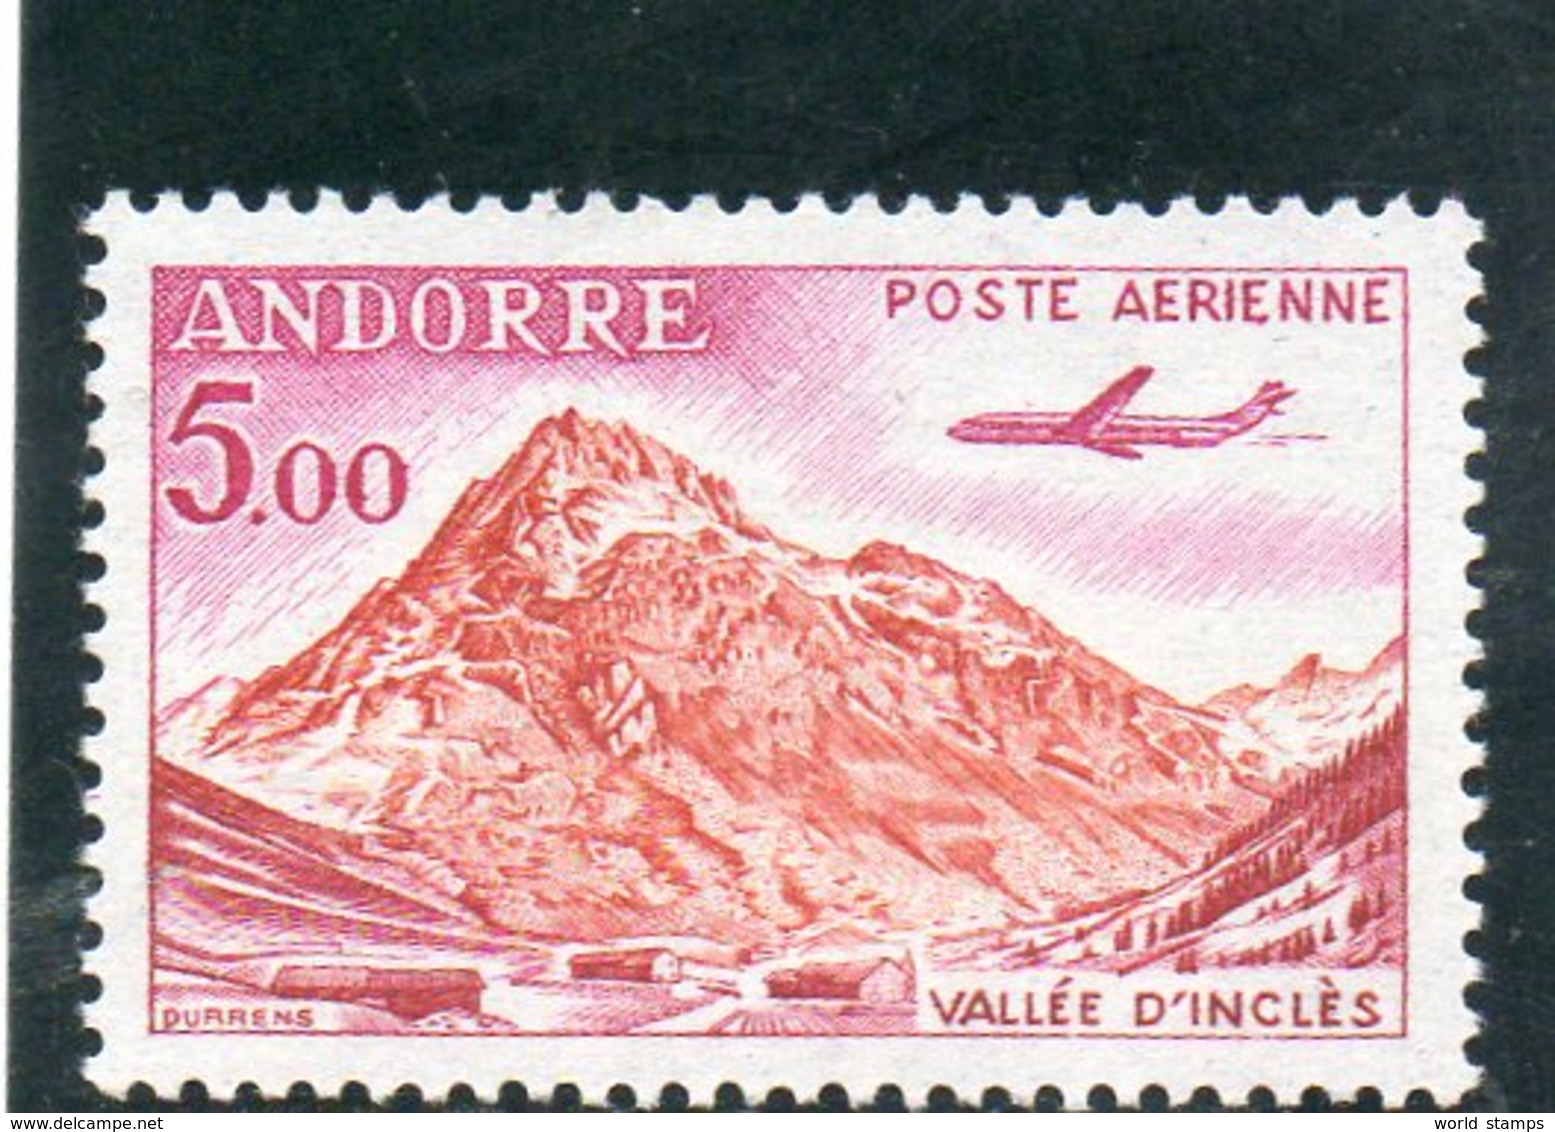 ANDORRE FR. 1961-4 ** - Airmail